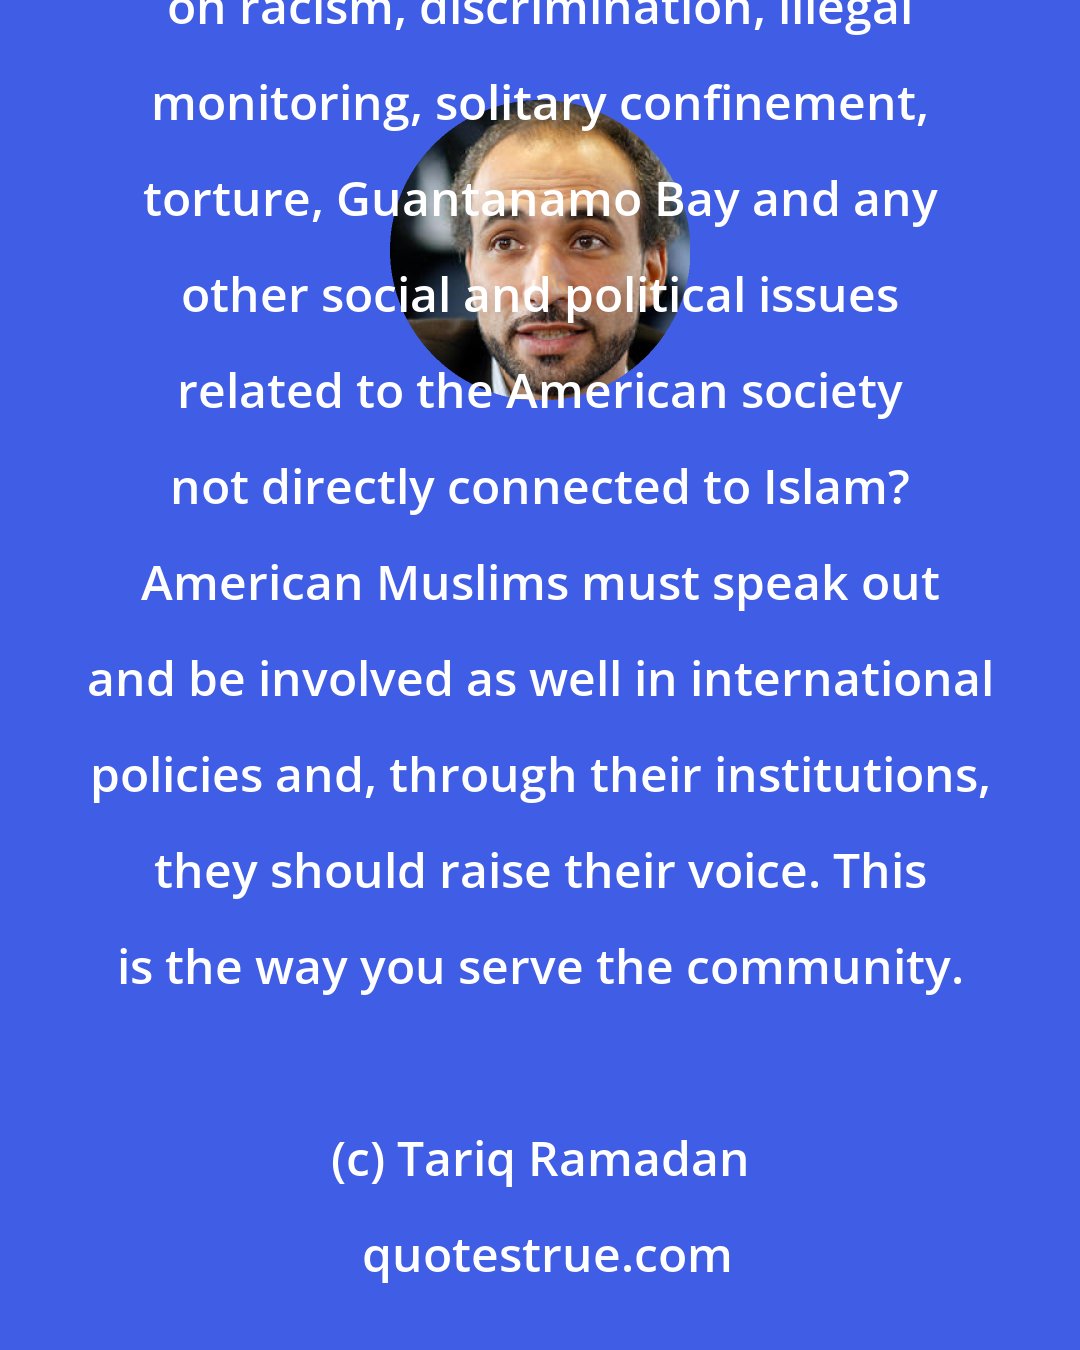 Tariq Ramadan: Shouldn't the American leadership be addressing what is happening in America, with its domestic policies on racism, discrimination, illegal monitoring, solitary confinement, torture, Guantanamo Bay and any other social and political issues related to the American society not directly connected to Islam? American Muslims must speak out and be involved as well in international policies and, through their institutions, they should raise their voice. This is the way you serve the community.